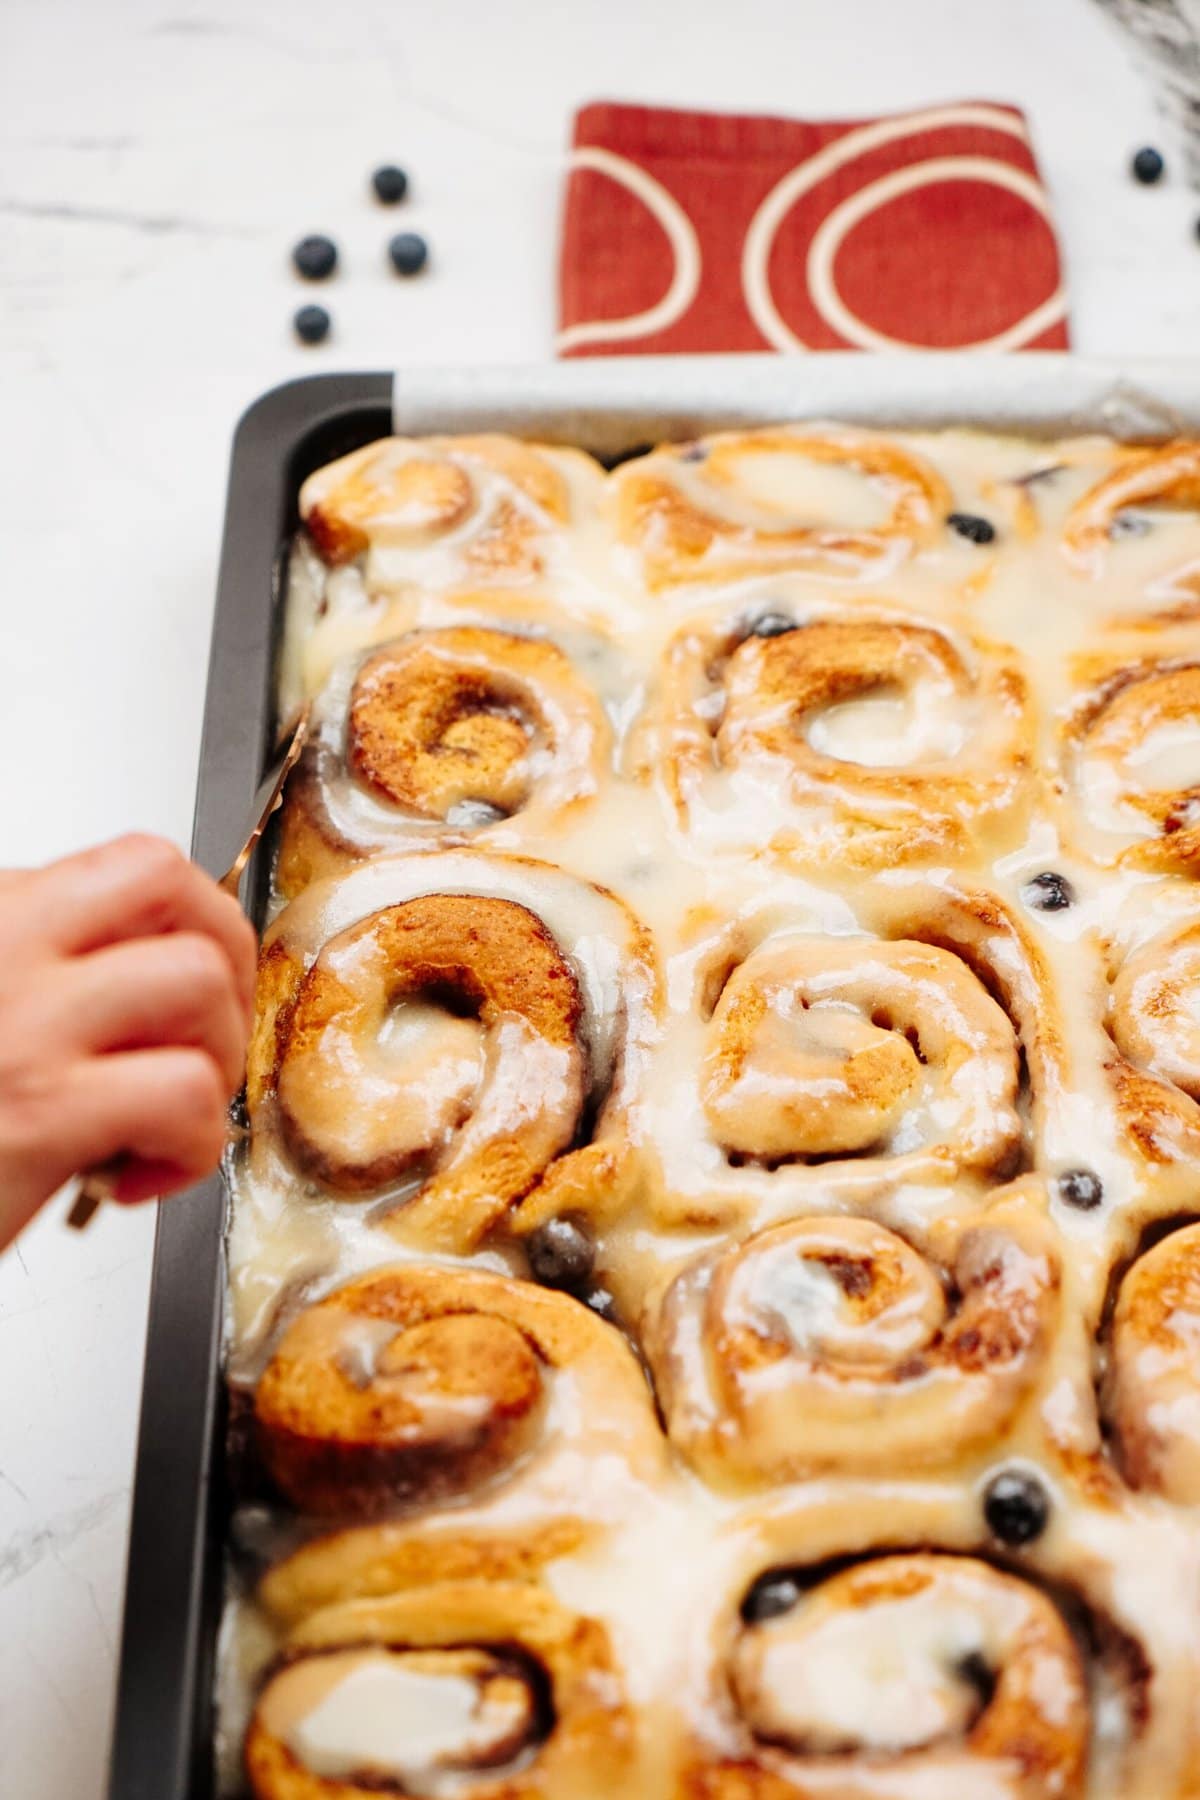 A person reaches to take a piece of glazed cinnamon roll from a baking tray with a red and white cloth in the background. Blueberries are sprinkled among the cinnamon rolls.